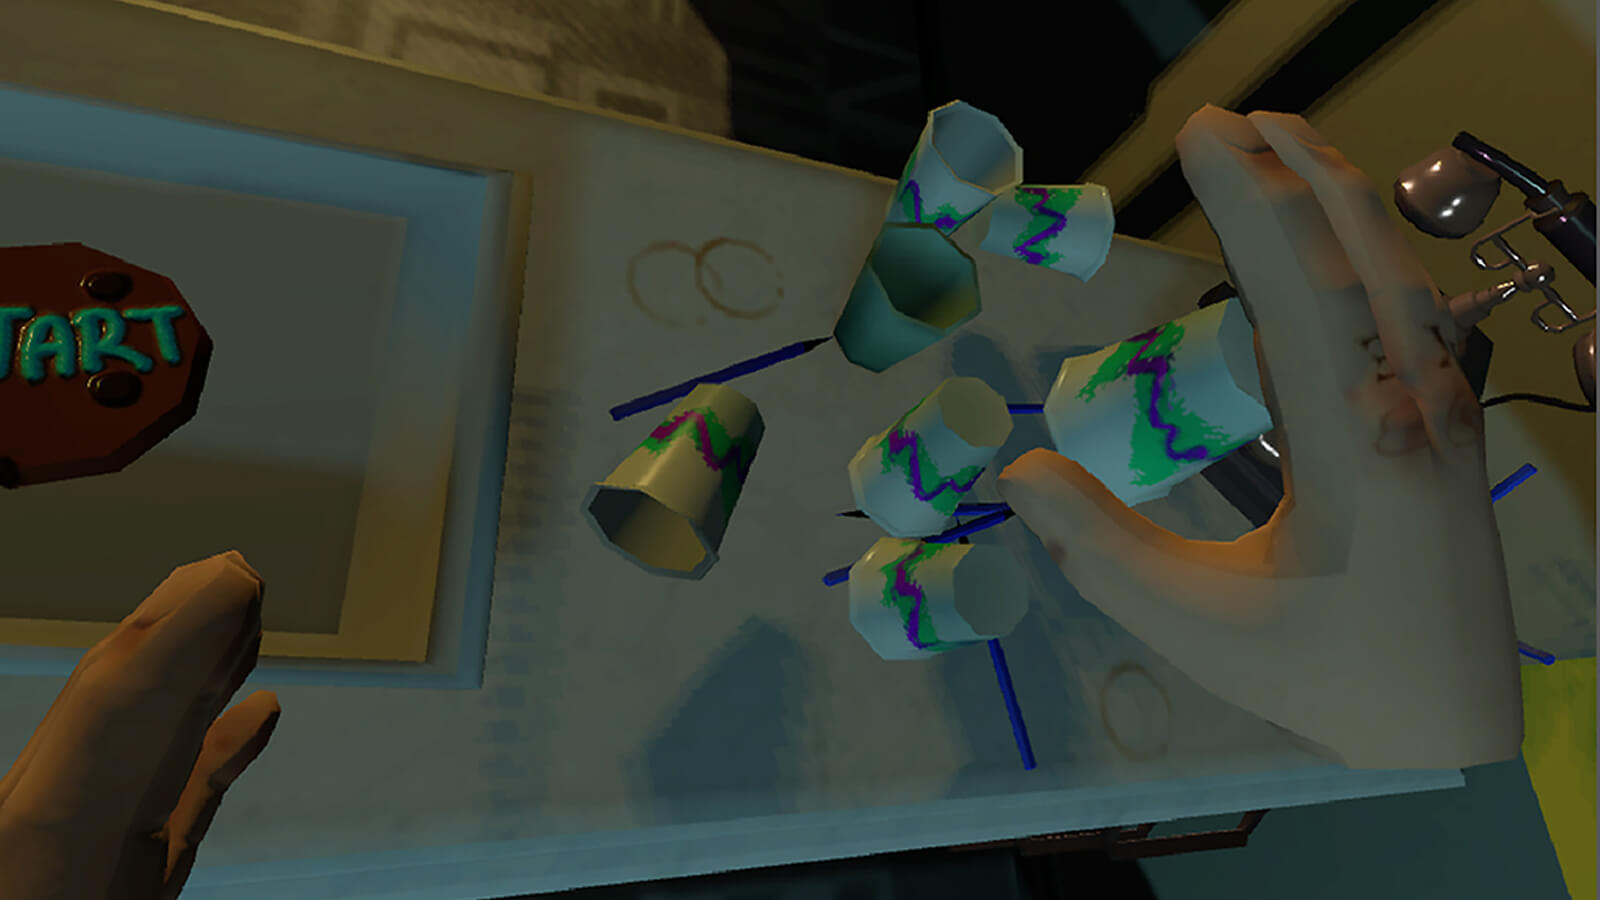 The player's virtual hands reaching out to grab paper cups